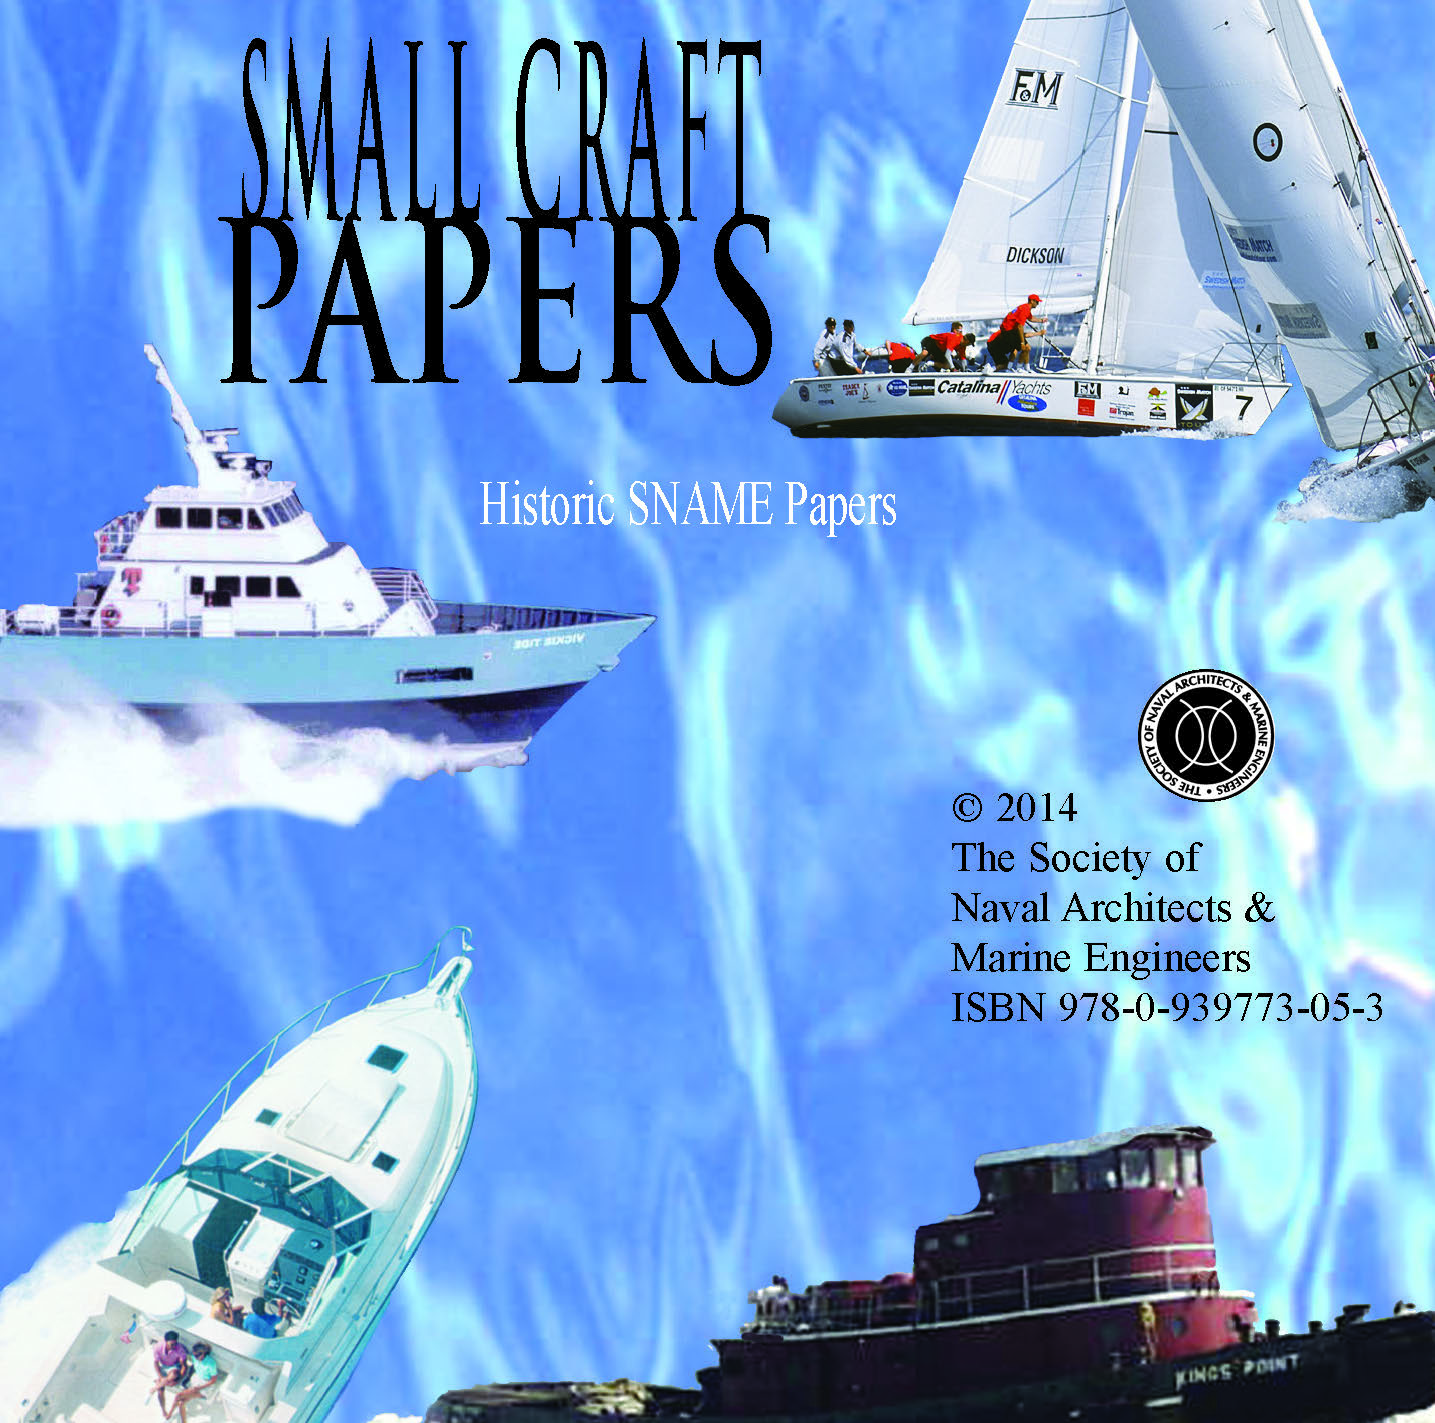 Small Craft Papers: 2002-2014